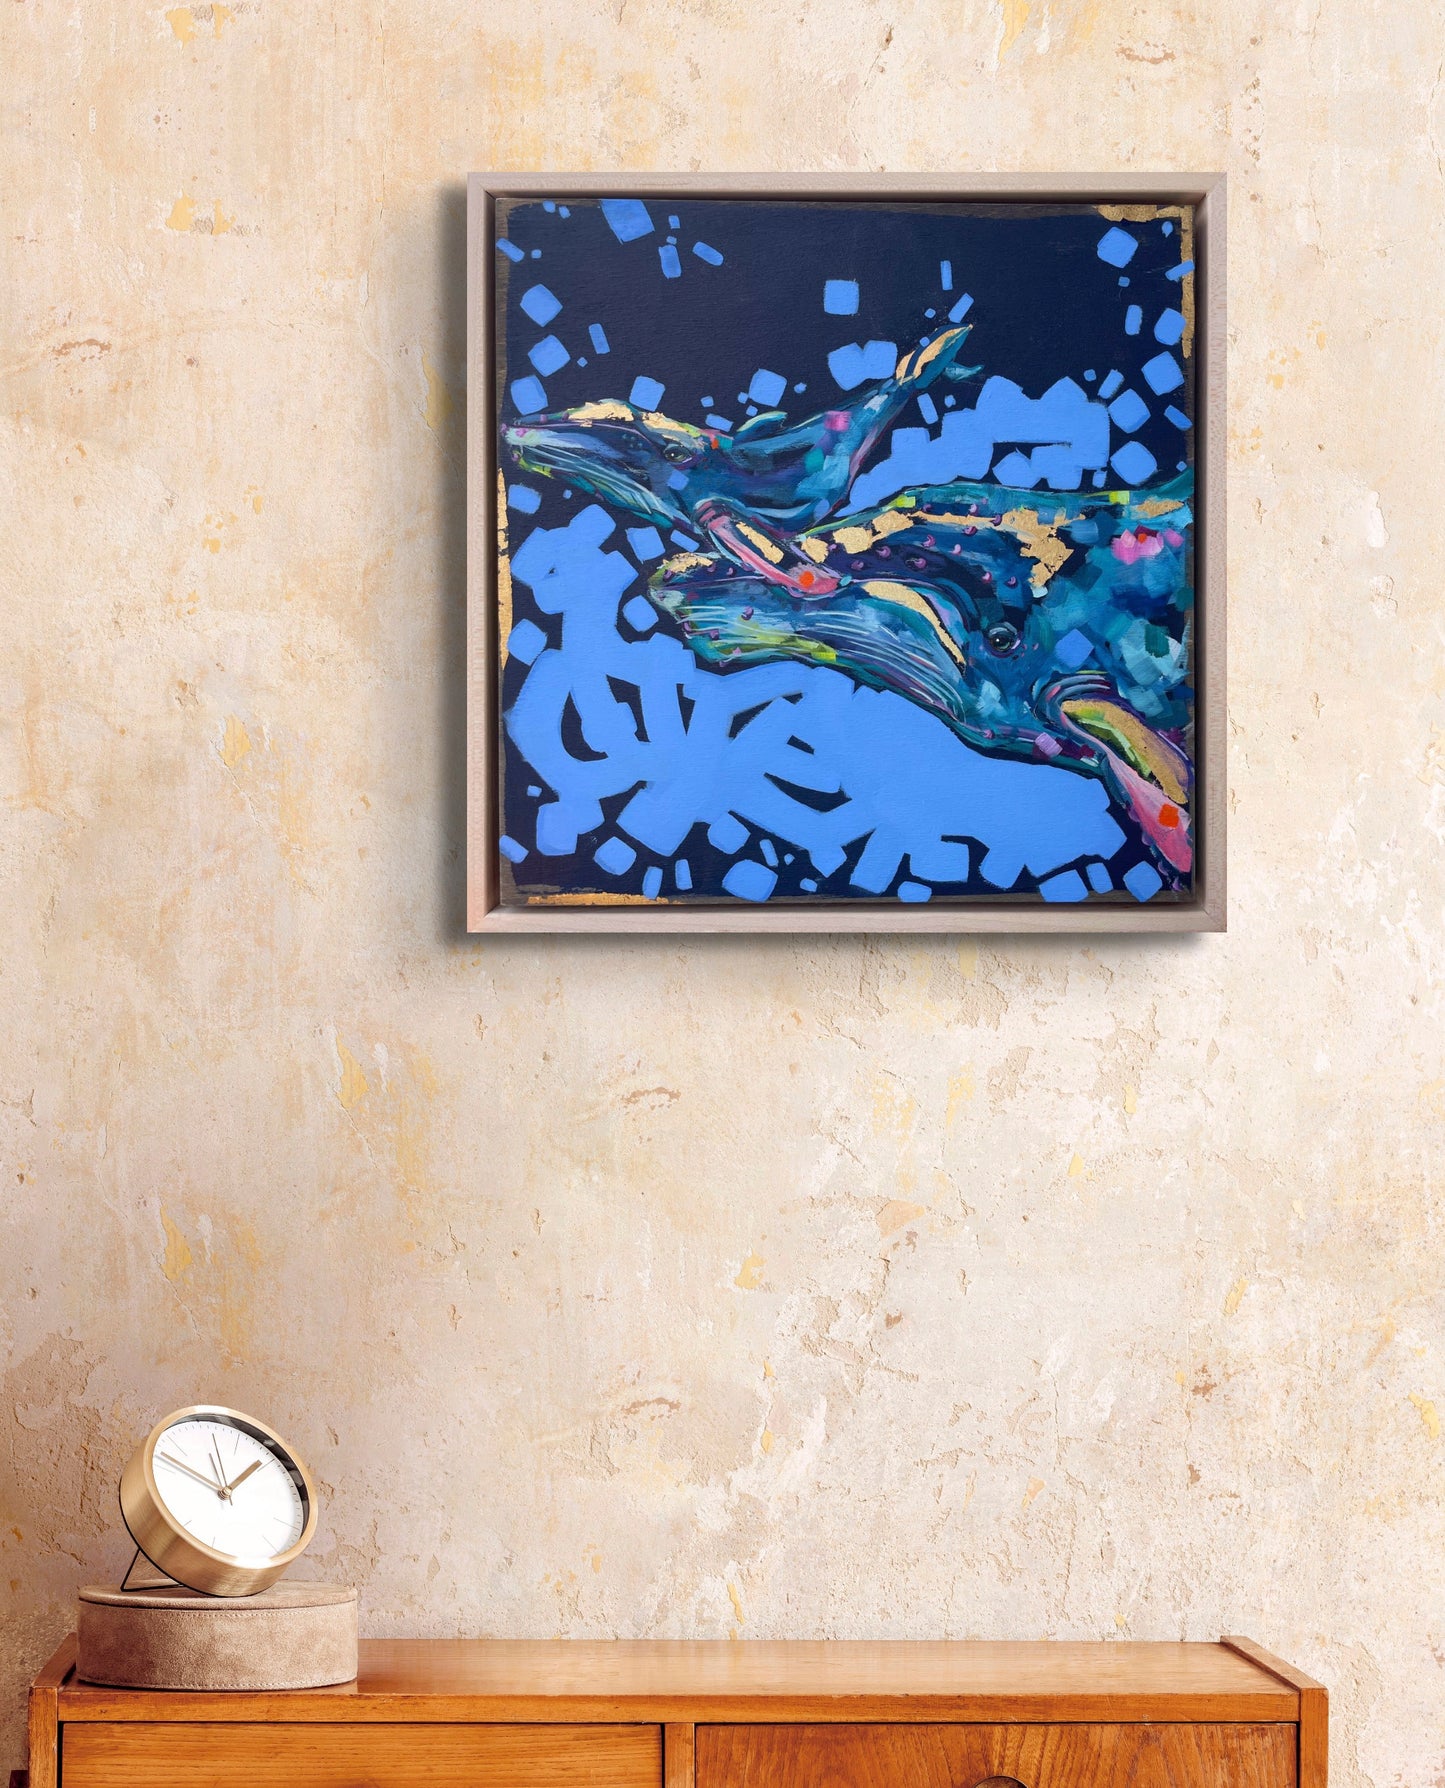 Oil painting of abstract whales in blue shades with gold leaf detail titled 'Everything Whale be Okay' by Shaney Watters in situ